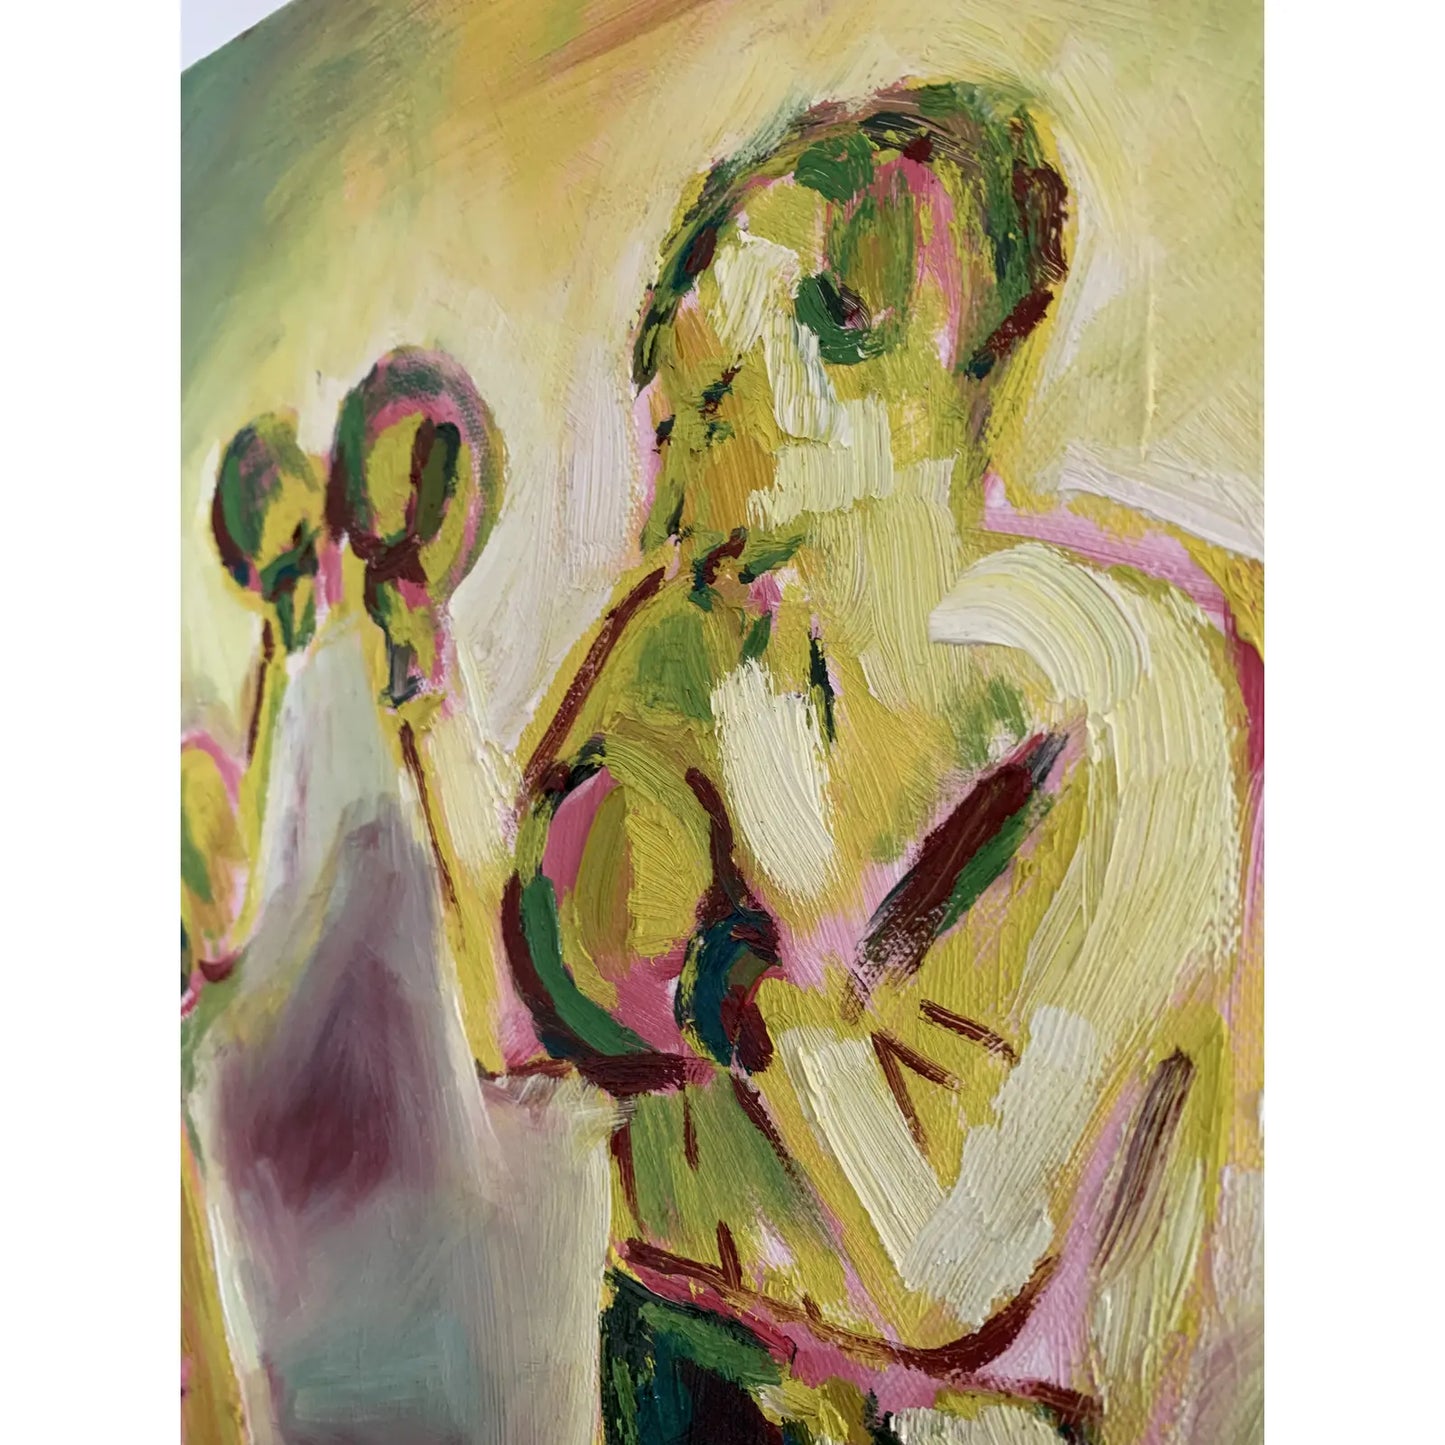 "Boxers" Contemporary Expressionist Figurative Sport Oil Painting on Canvas